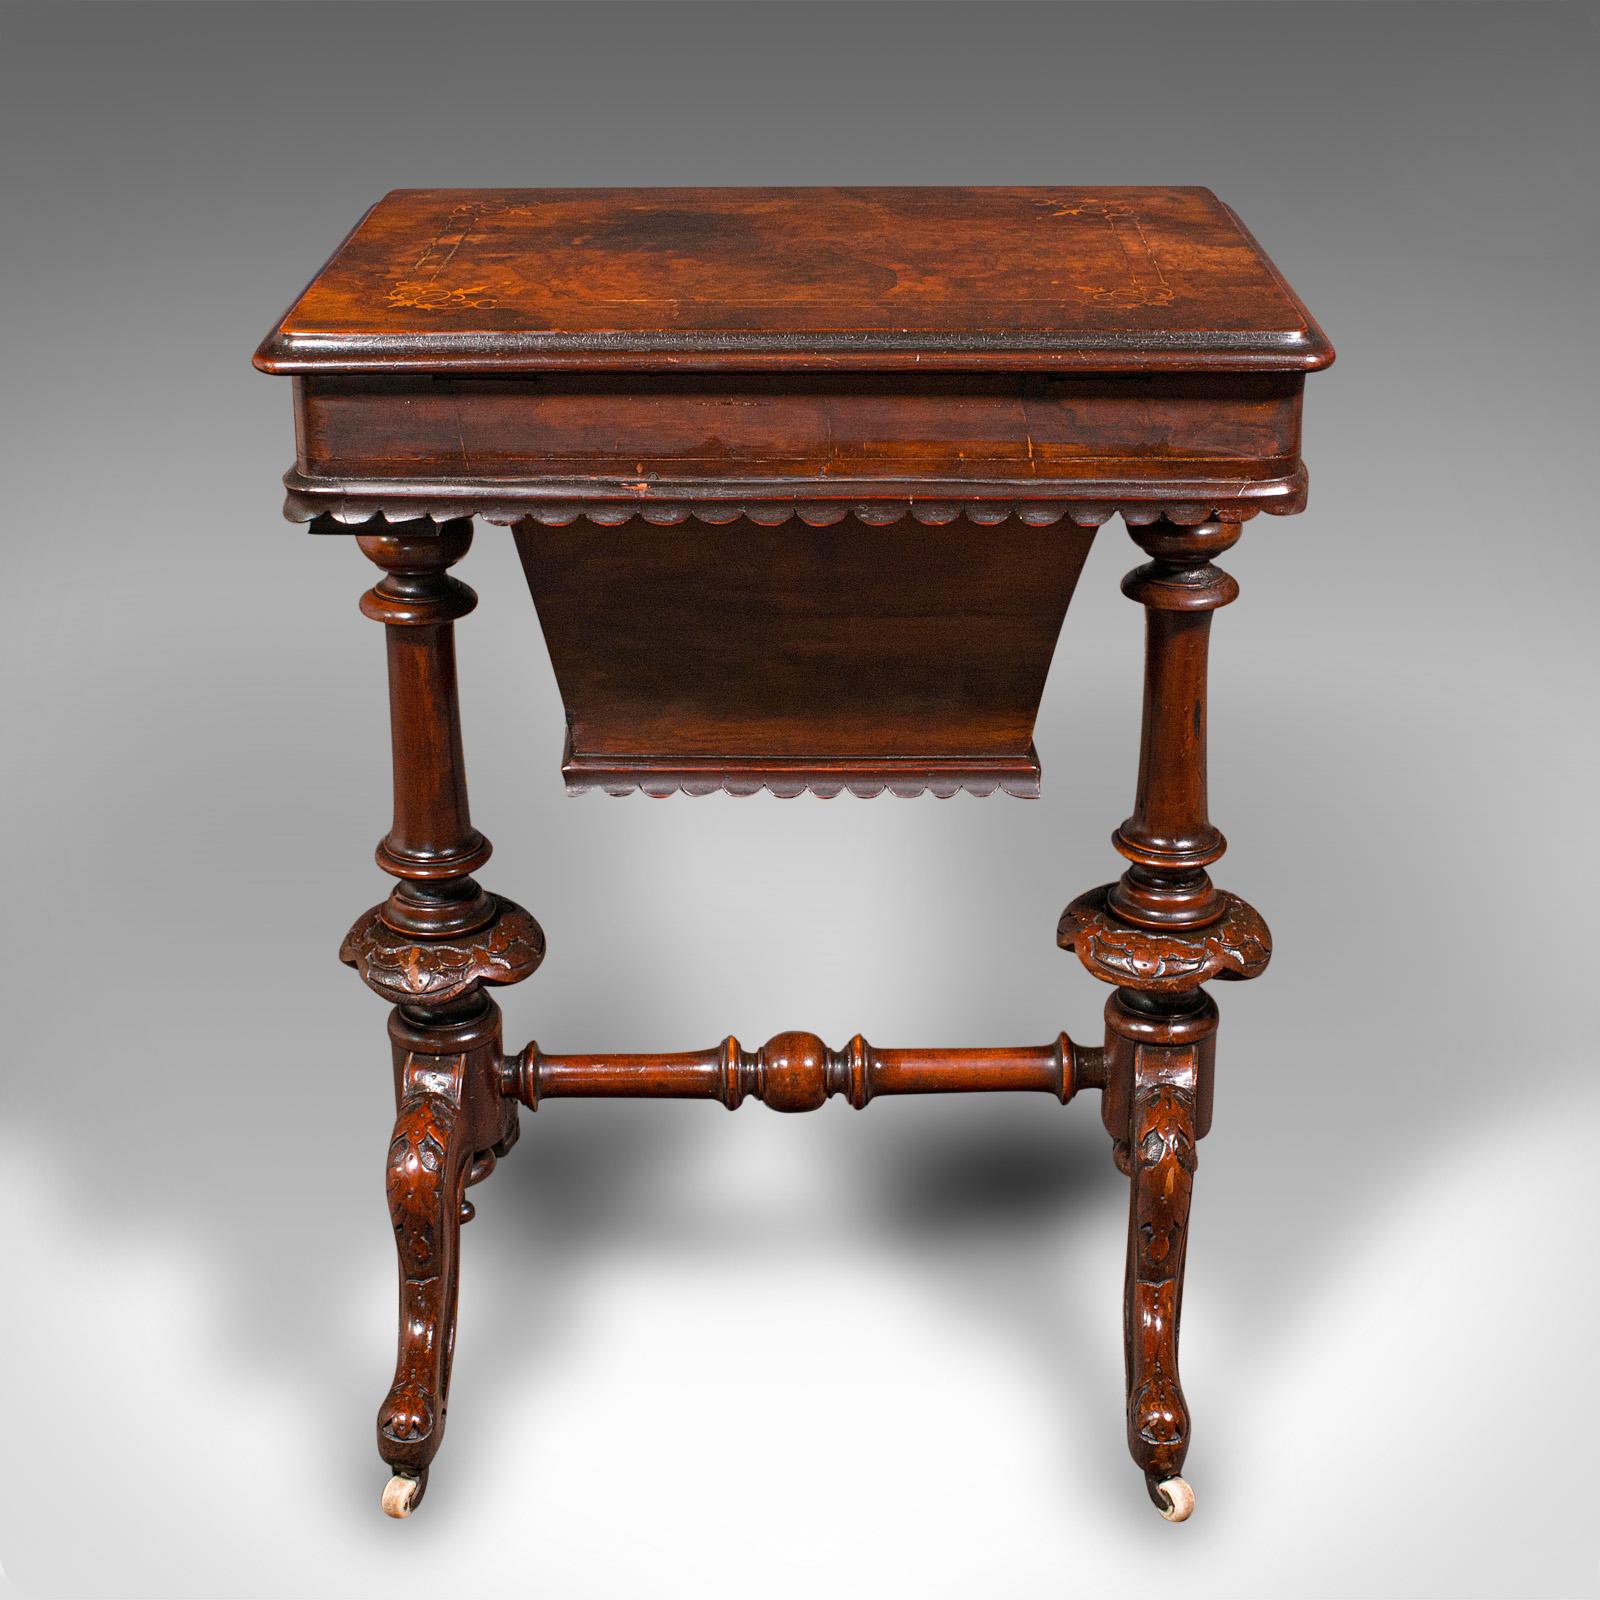 19th Century Antique Ladies Work Table, English, Burr Walnut, Sewing Table, Victorian, C.1850 For Sale